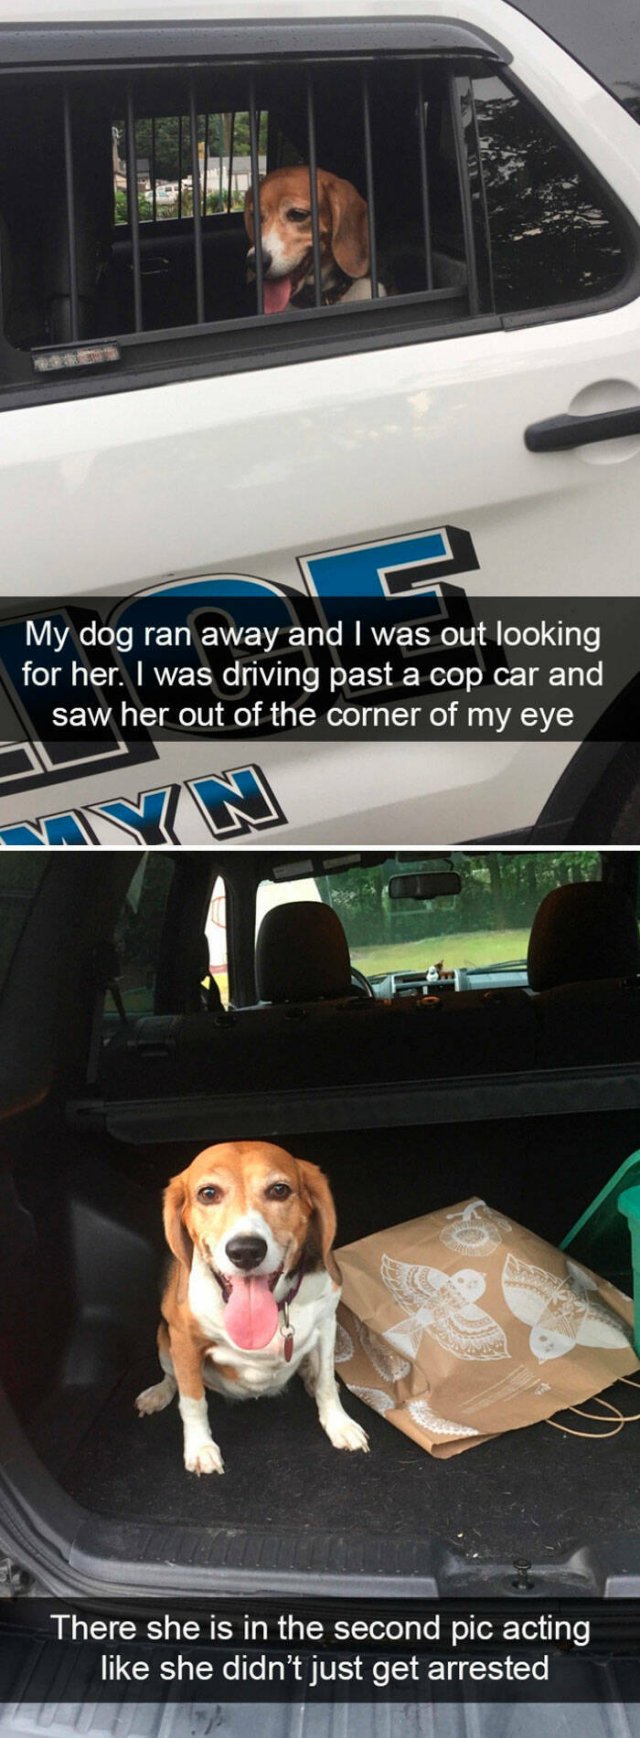 Memes With Dogs (26 pics)